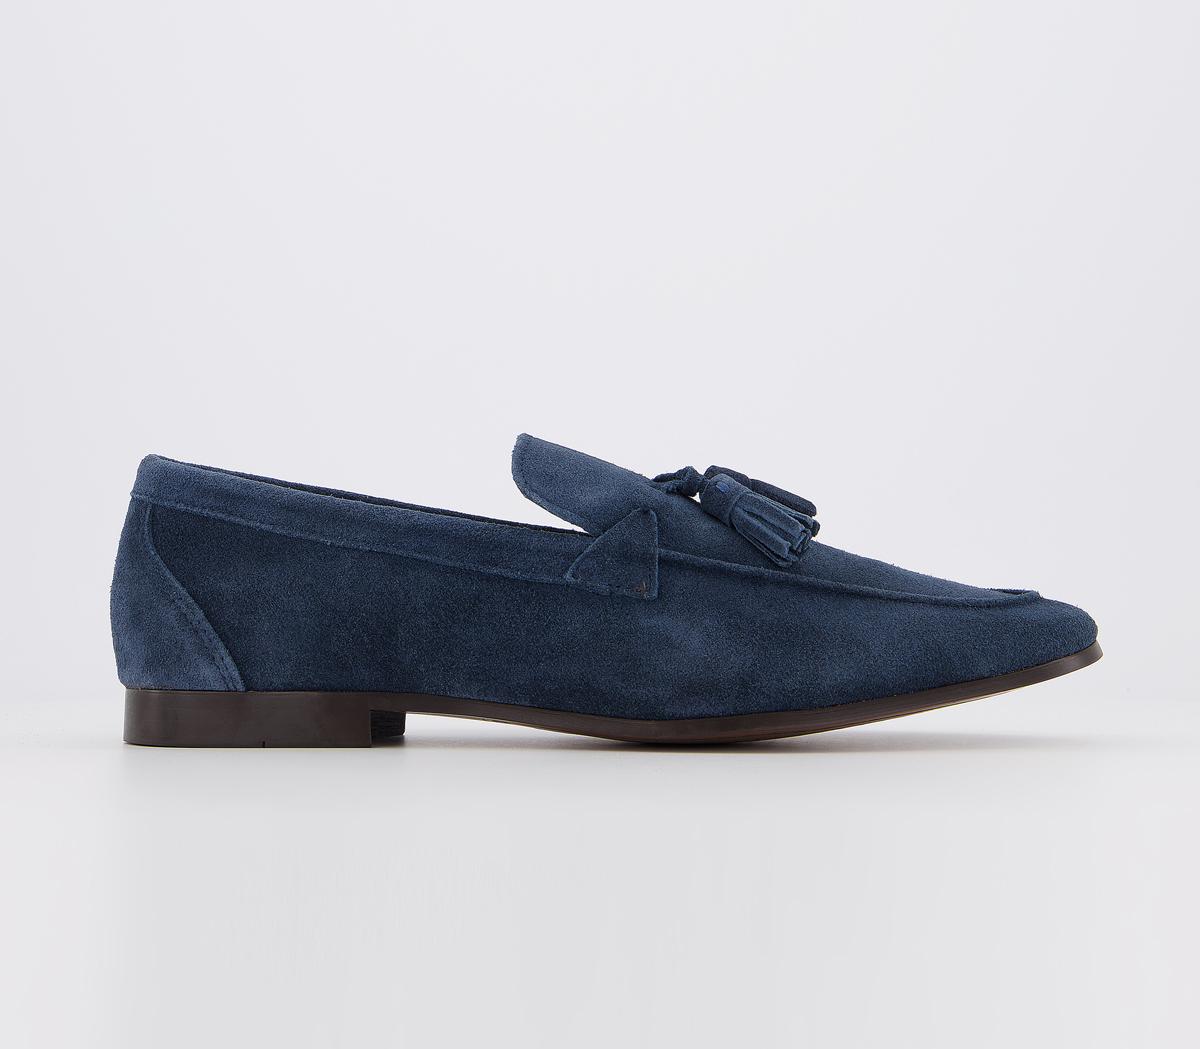 OFFICEClive Tassel LoafersNavy Suede